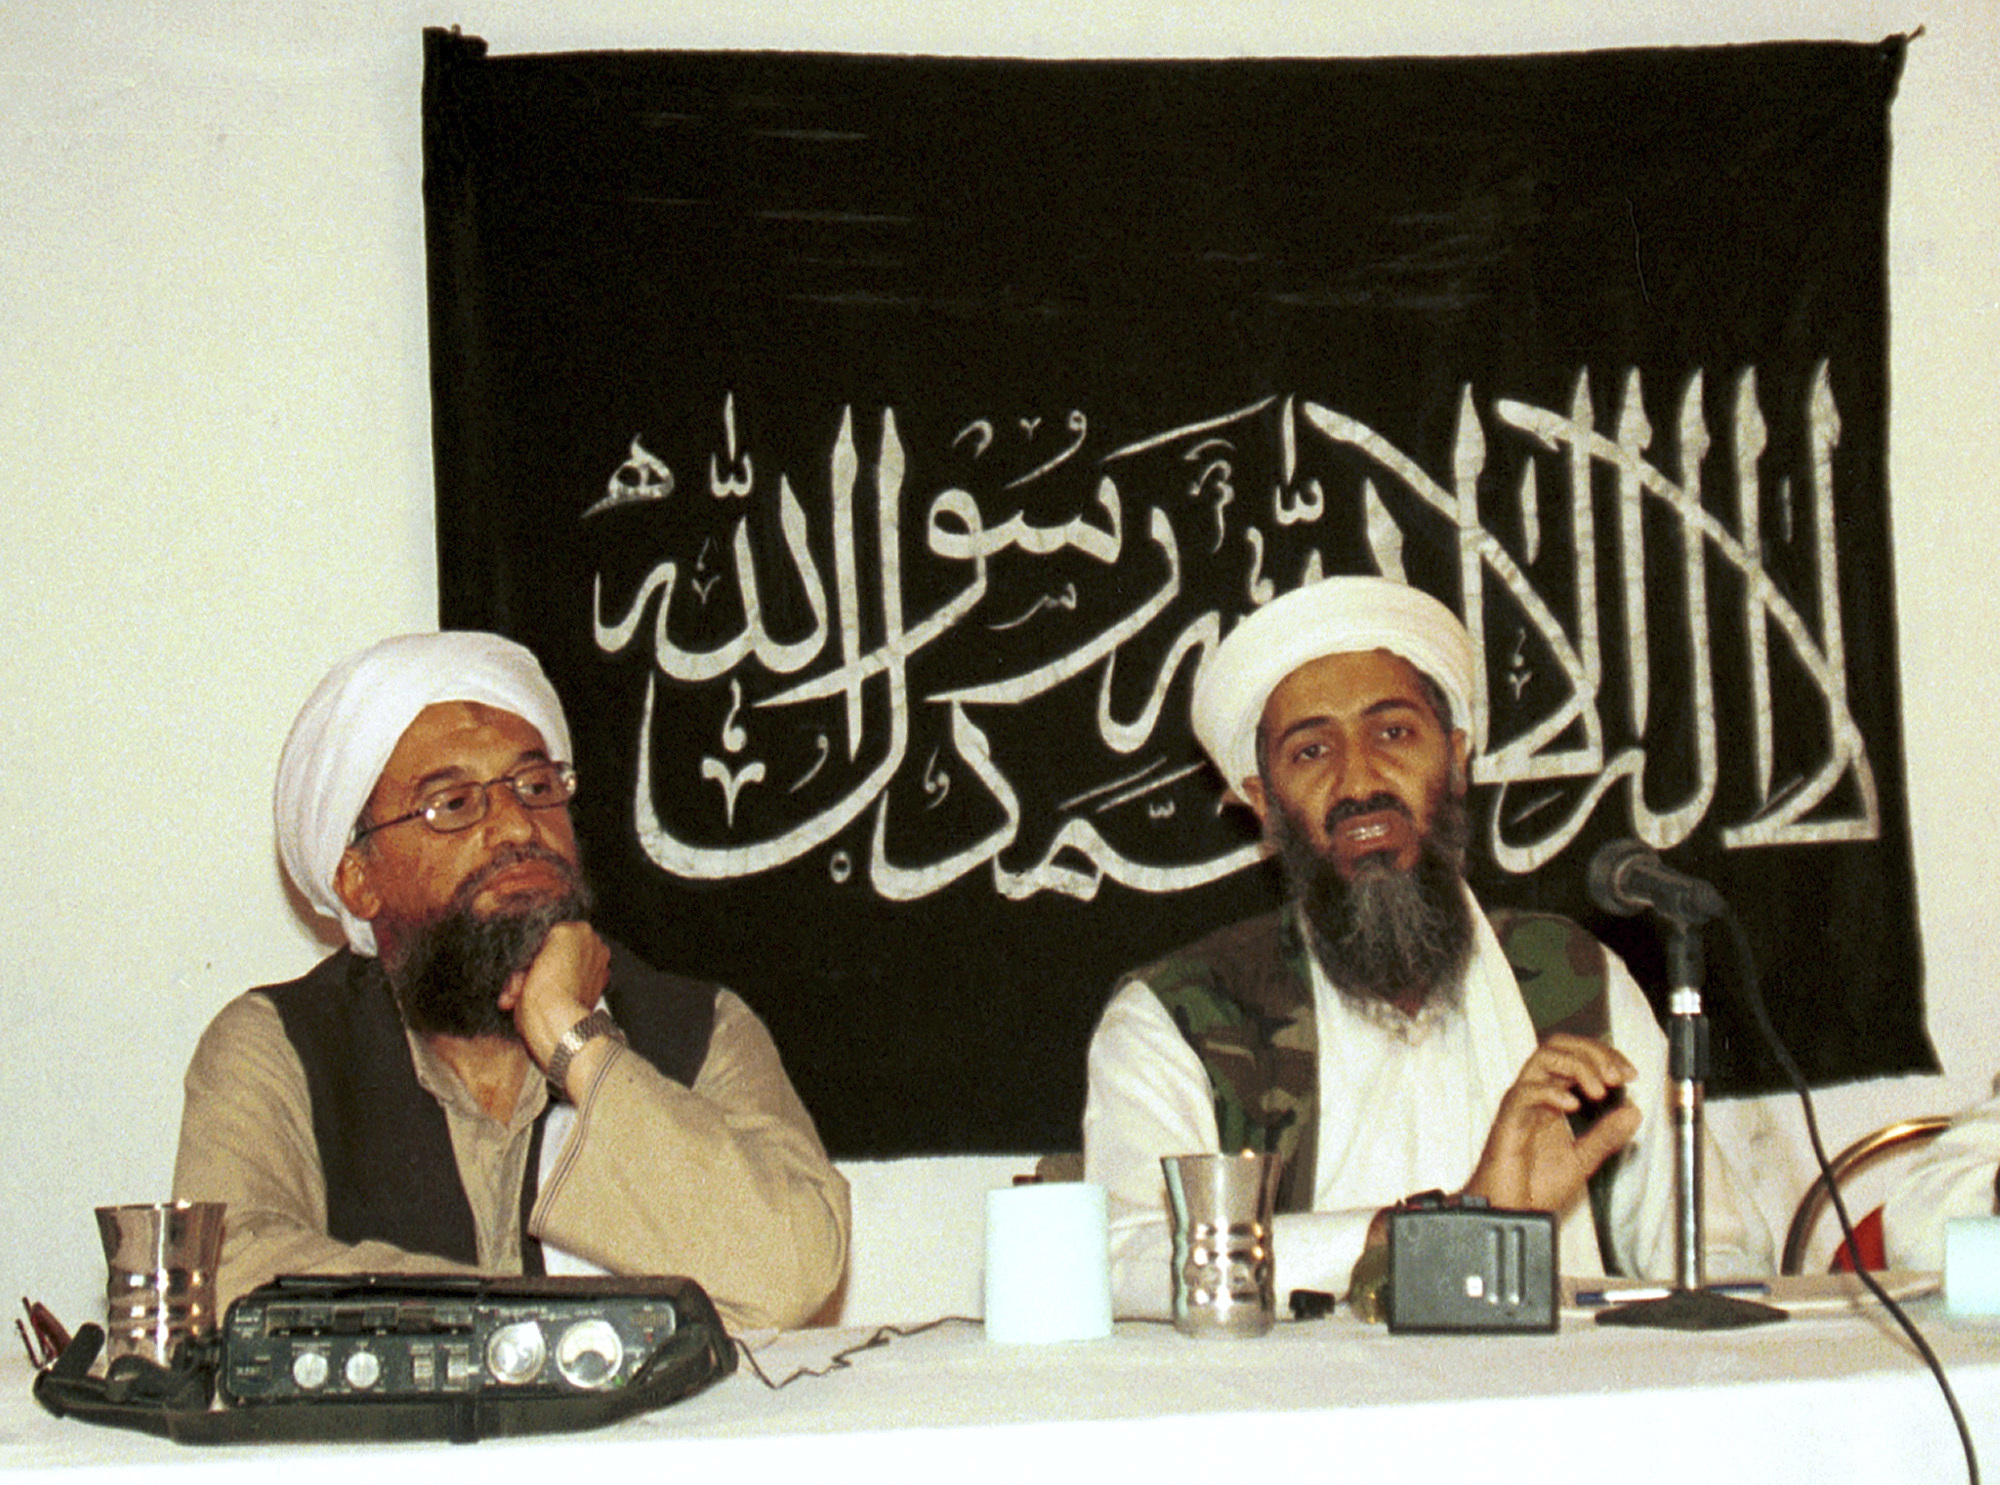 FILE - In this 1998 file photo made available Friday, March 19, 2004, Ayman al-Zawahri, left, listens during a news conference with Osama bin Laden in Khost, Afghanistan. A U.S. airstrike has killed al-Qaida leader Ayman al-Zawahri in Afghanistan, according to a person familiar with the matter. President Joe Biden will speak about the operation on Monday night, Aug. 1, 2022, from the White House. (AP Photo/Mazhar Ali Khan, File)